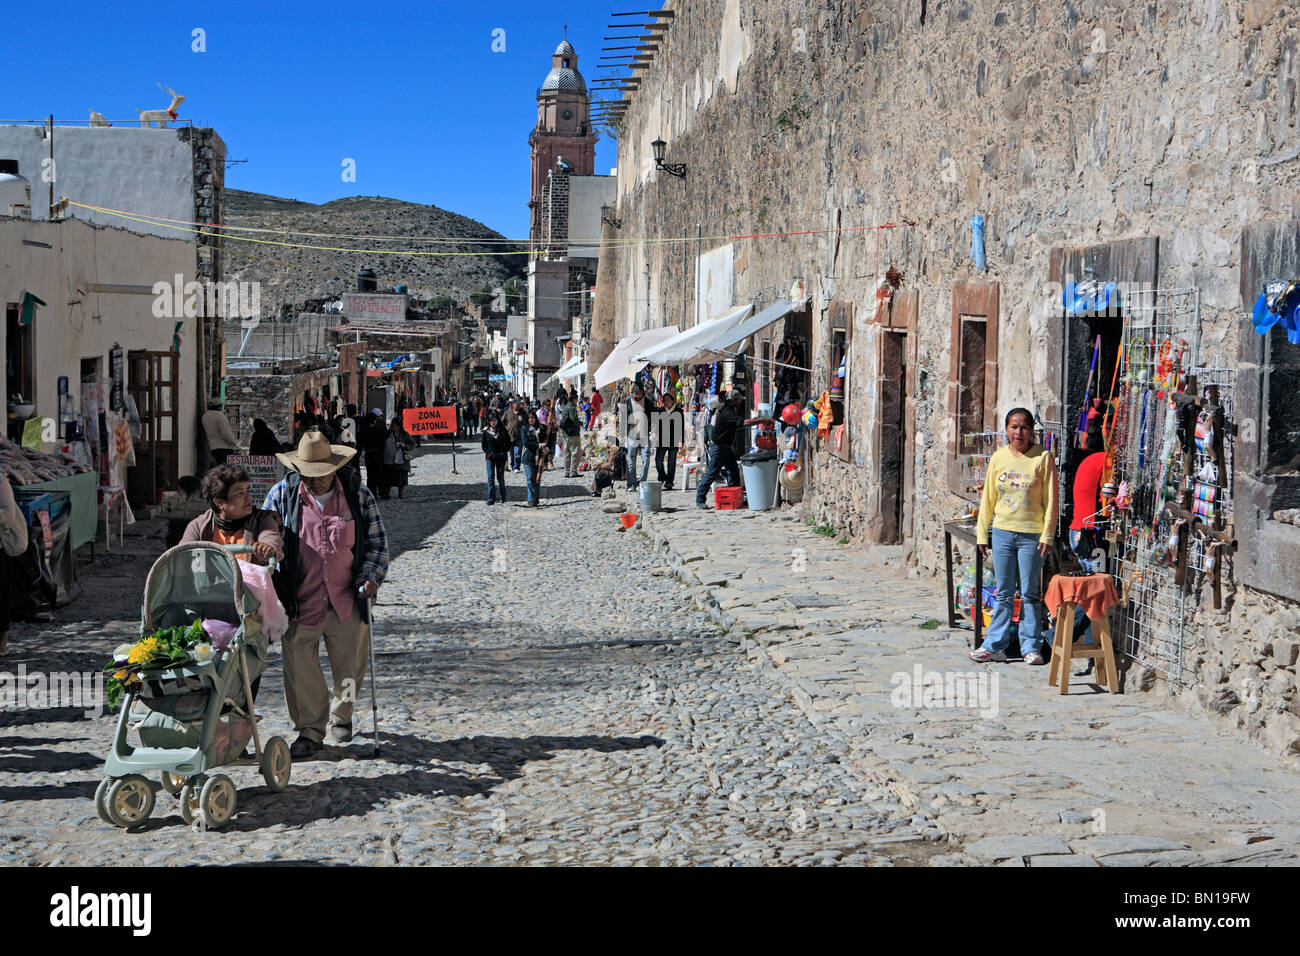 Real de catorce mexico hi-res stock photography and images - Alamy